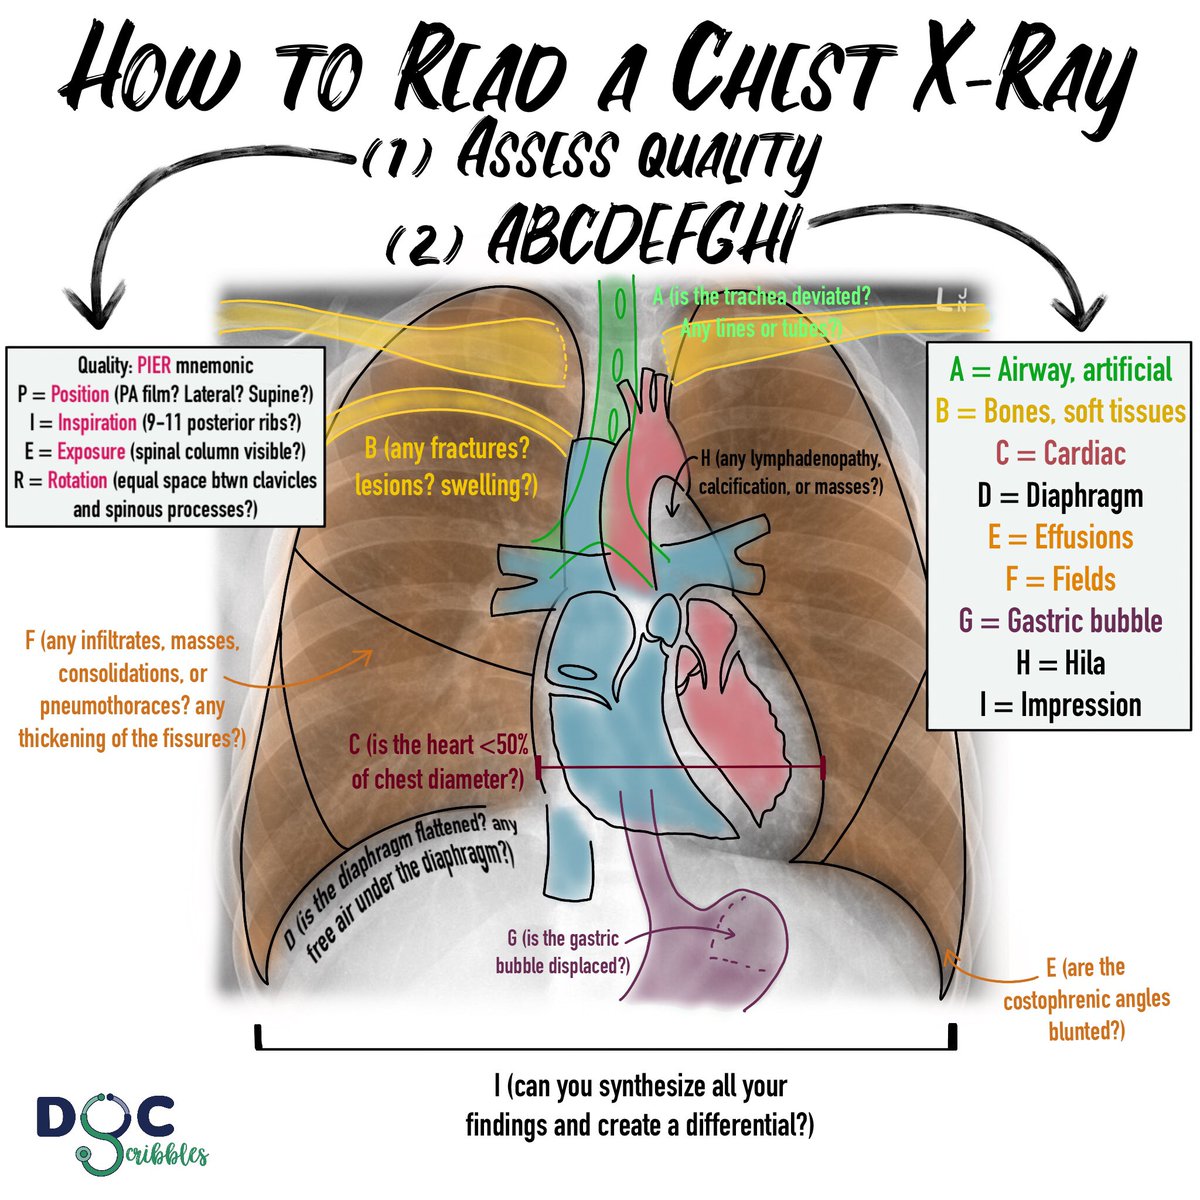 The ABCs of CXRs 
—————————
#MedEd #medicaleducation #FOAMed #FOAMrad #chestxray #CXR #Radiology #medtwitter 
Credit to @Radiopaedia for the original chest x-ray!